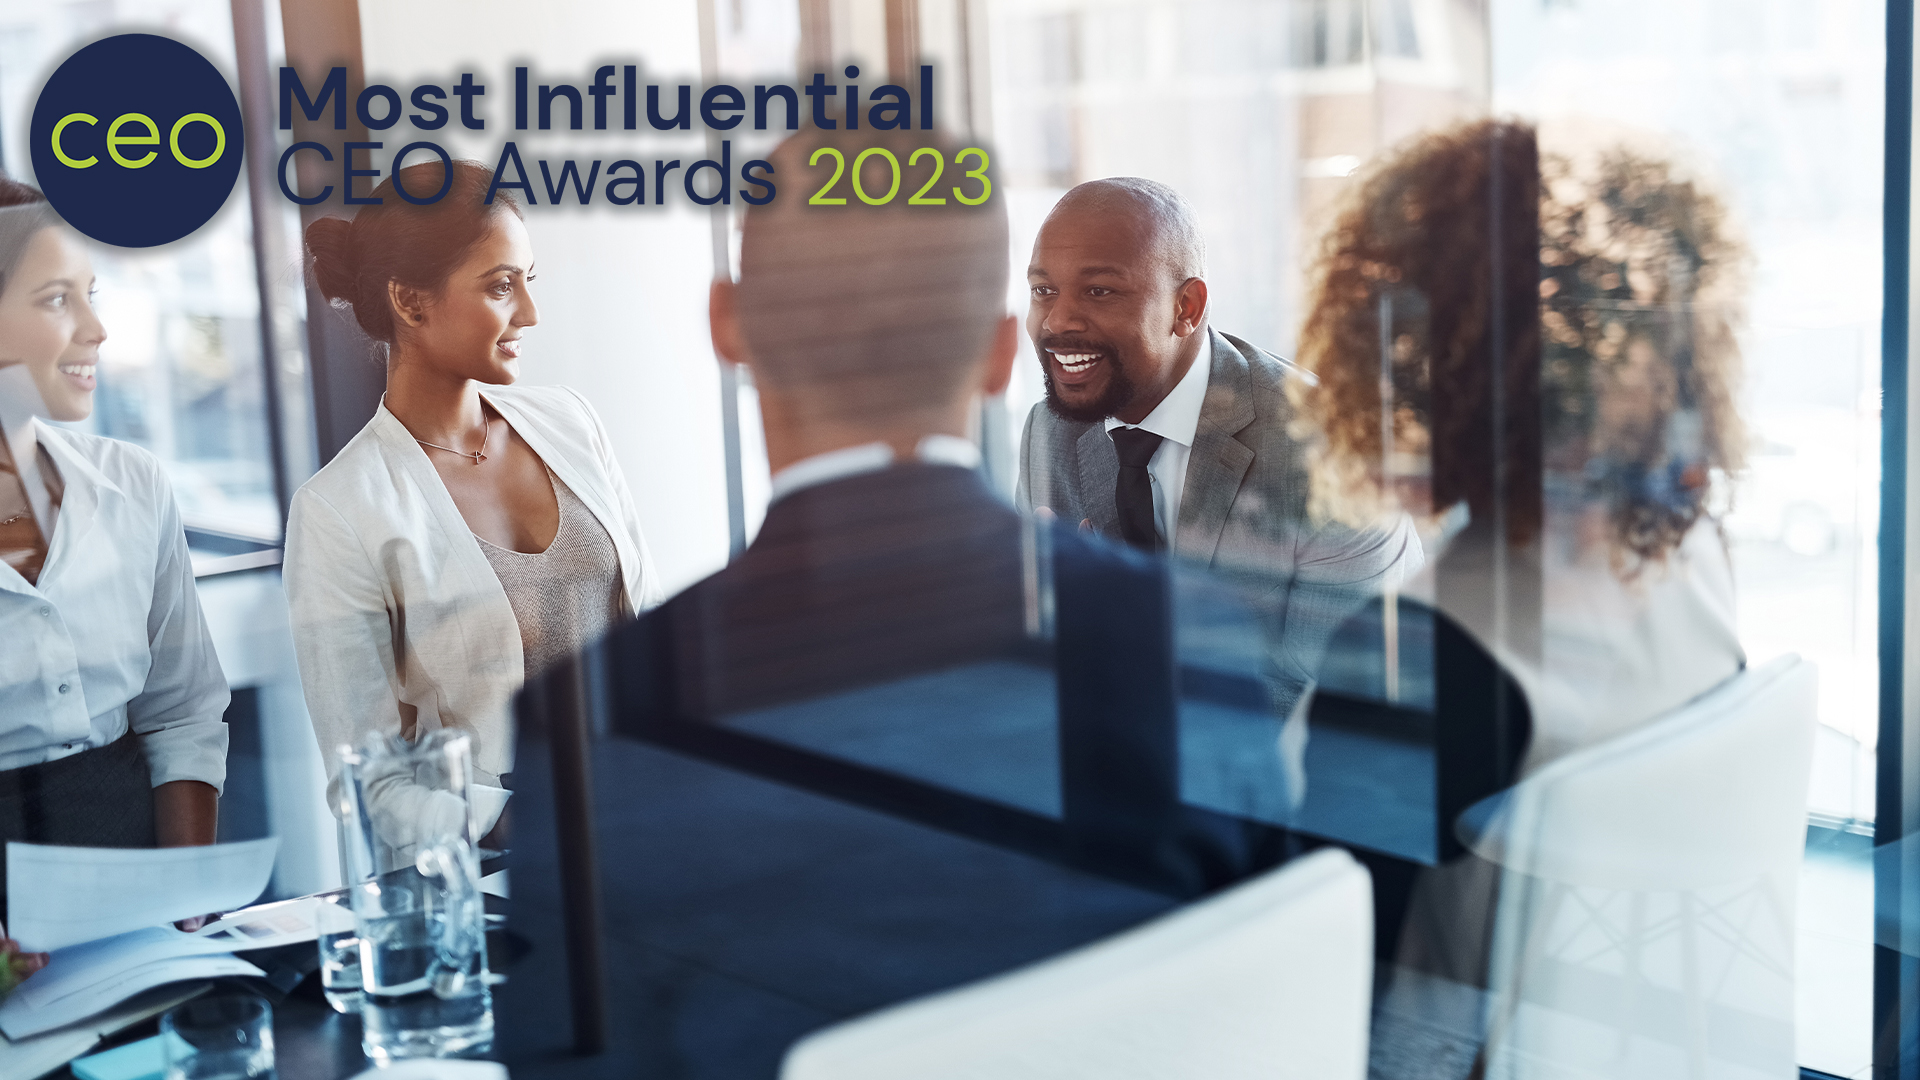 ceo monthly most influential ceo awards 2023